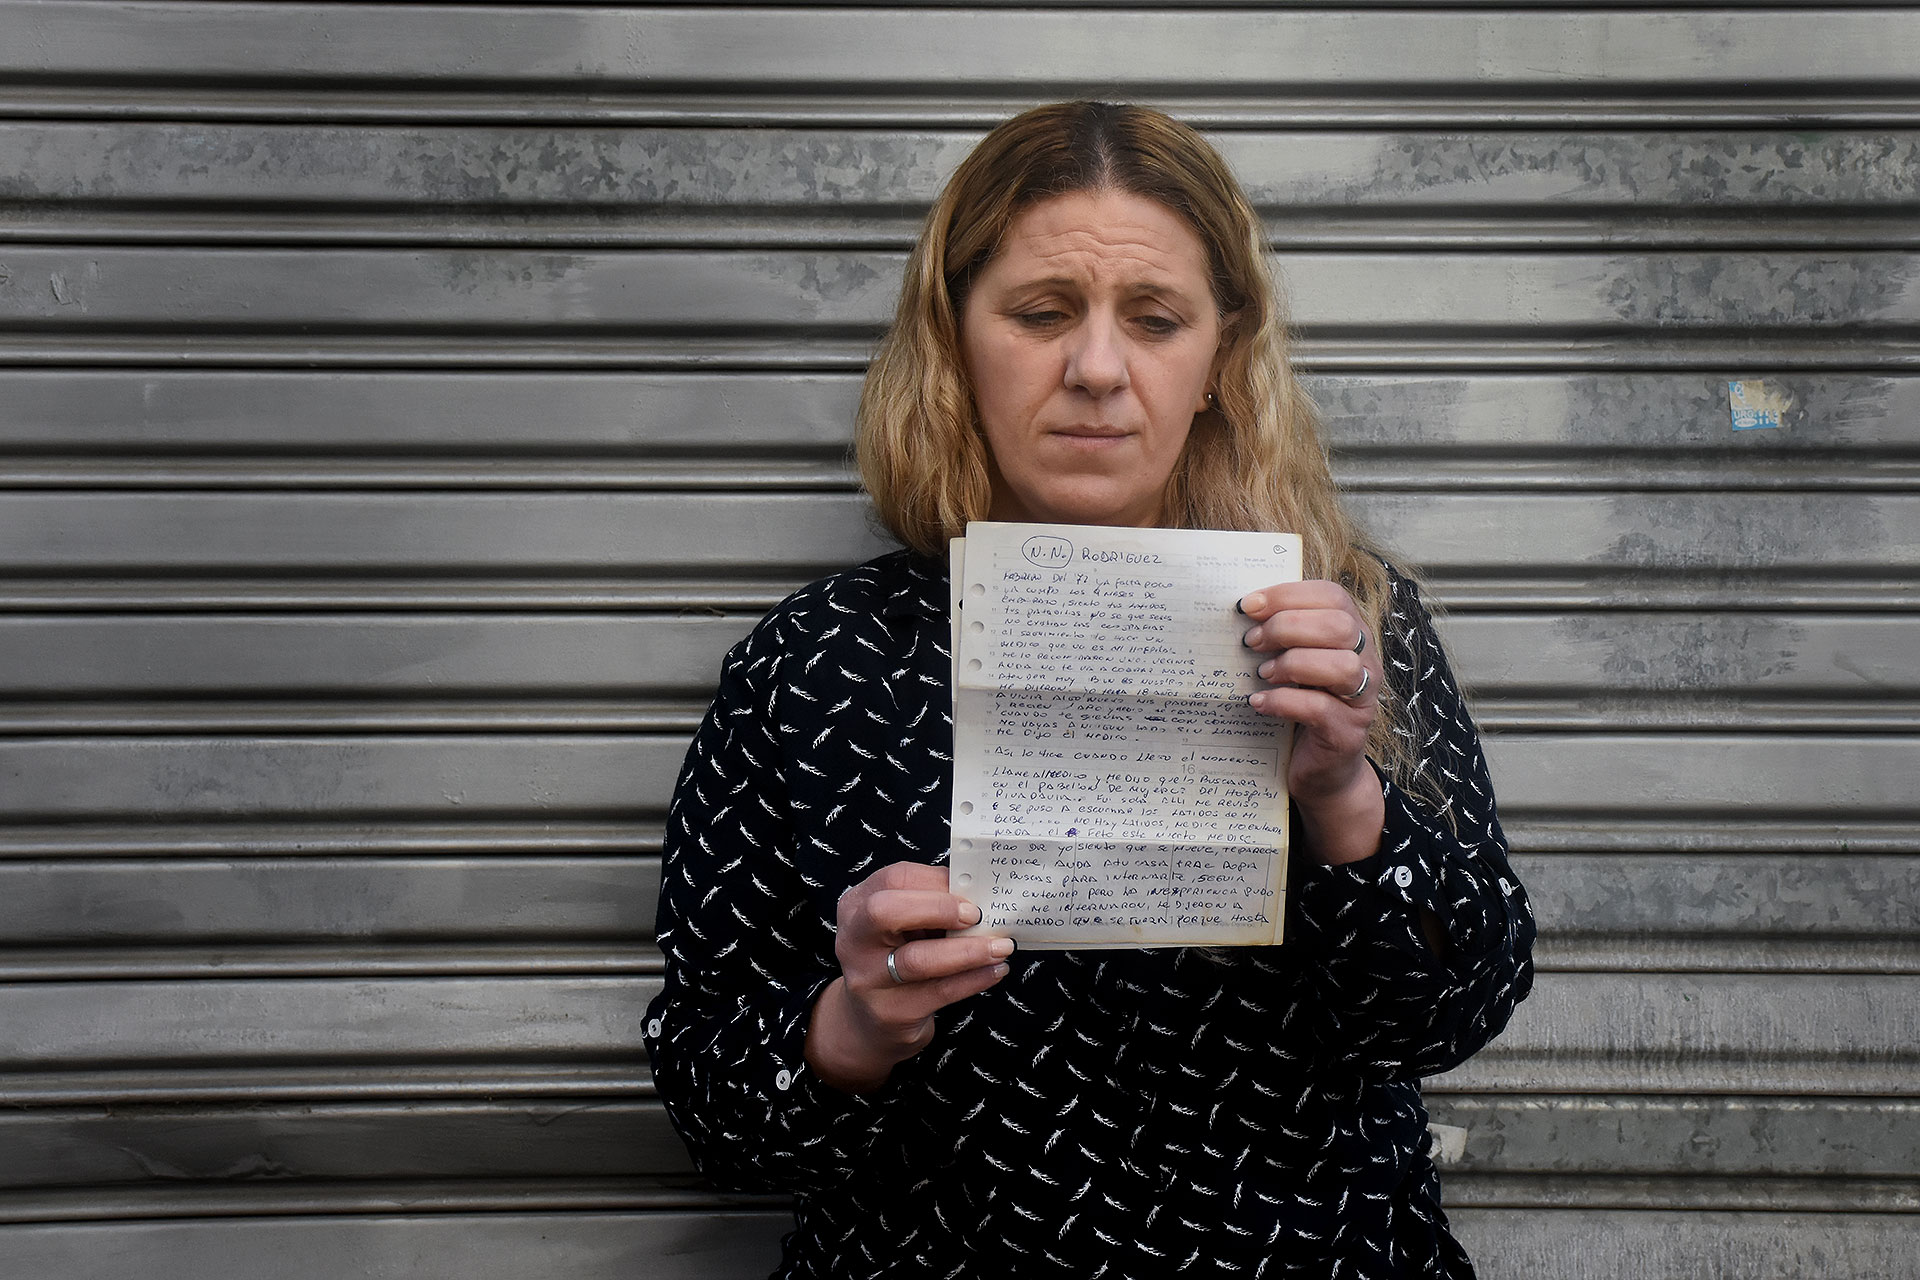 She keeps the letter to give it to that NN daughter if she ever finds it (Photo: Nicolás Stulberg)